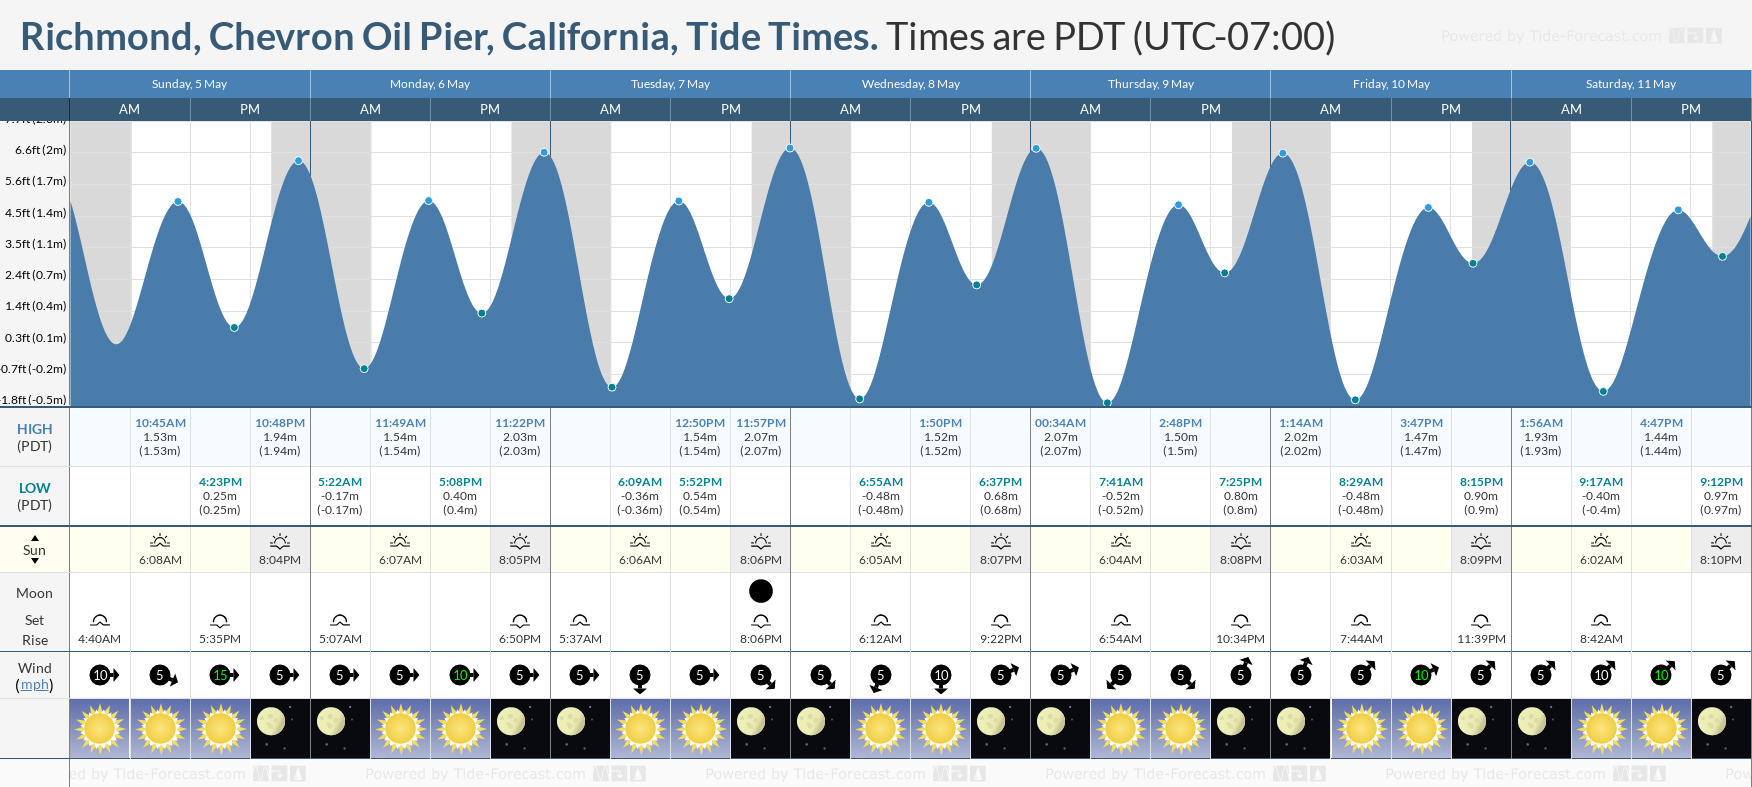 Richmond, Chevron Oil Pier, California Tide Chart including high and low tide tide times for the next 7 days